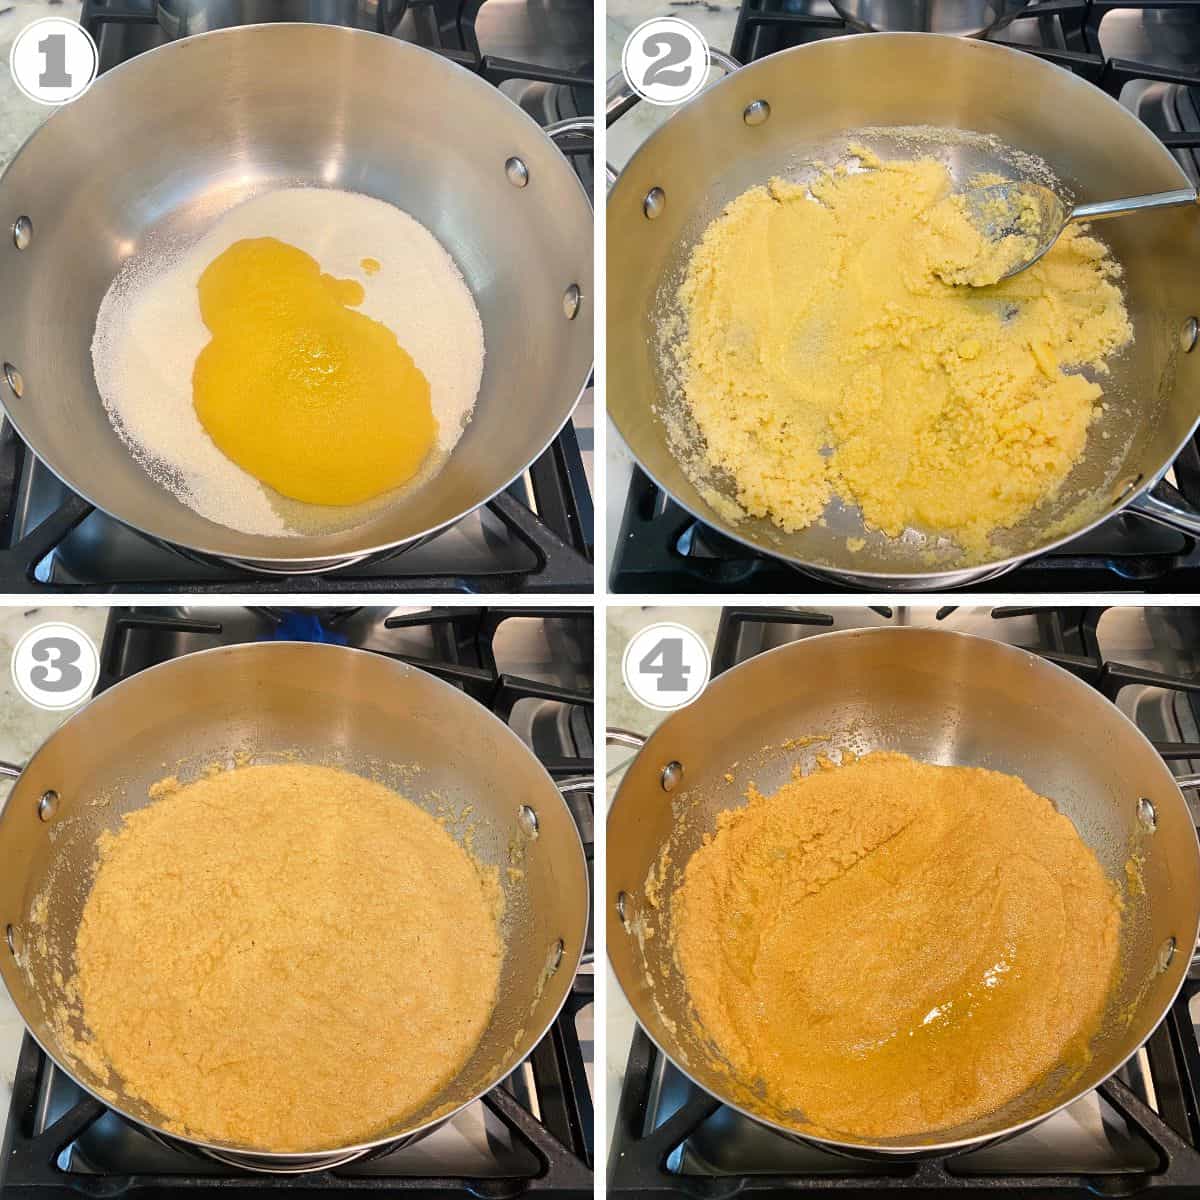 photos one through four showing how to roast sooji with ghee